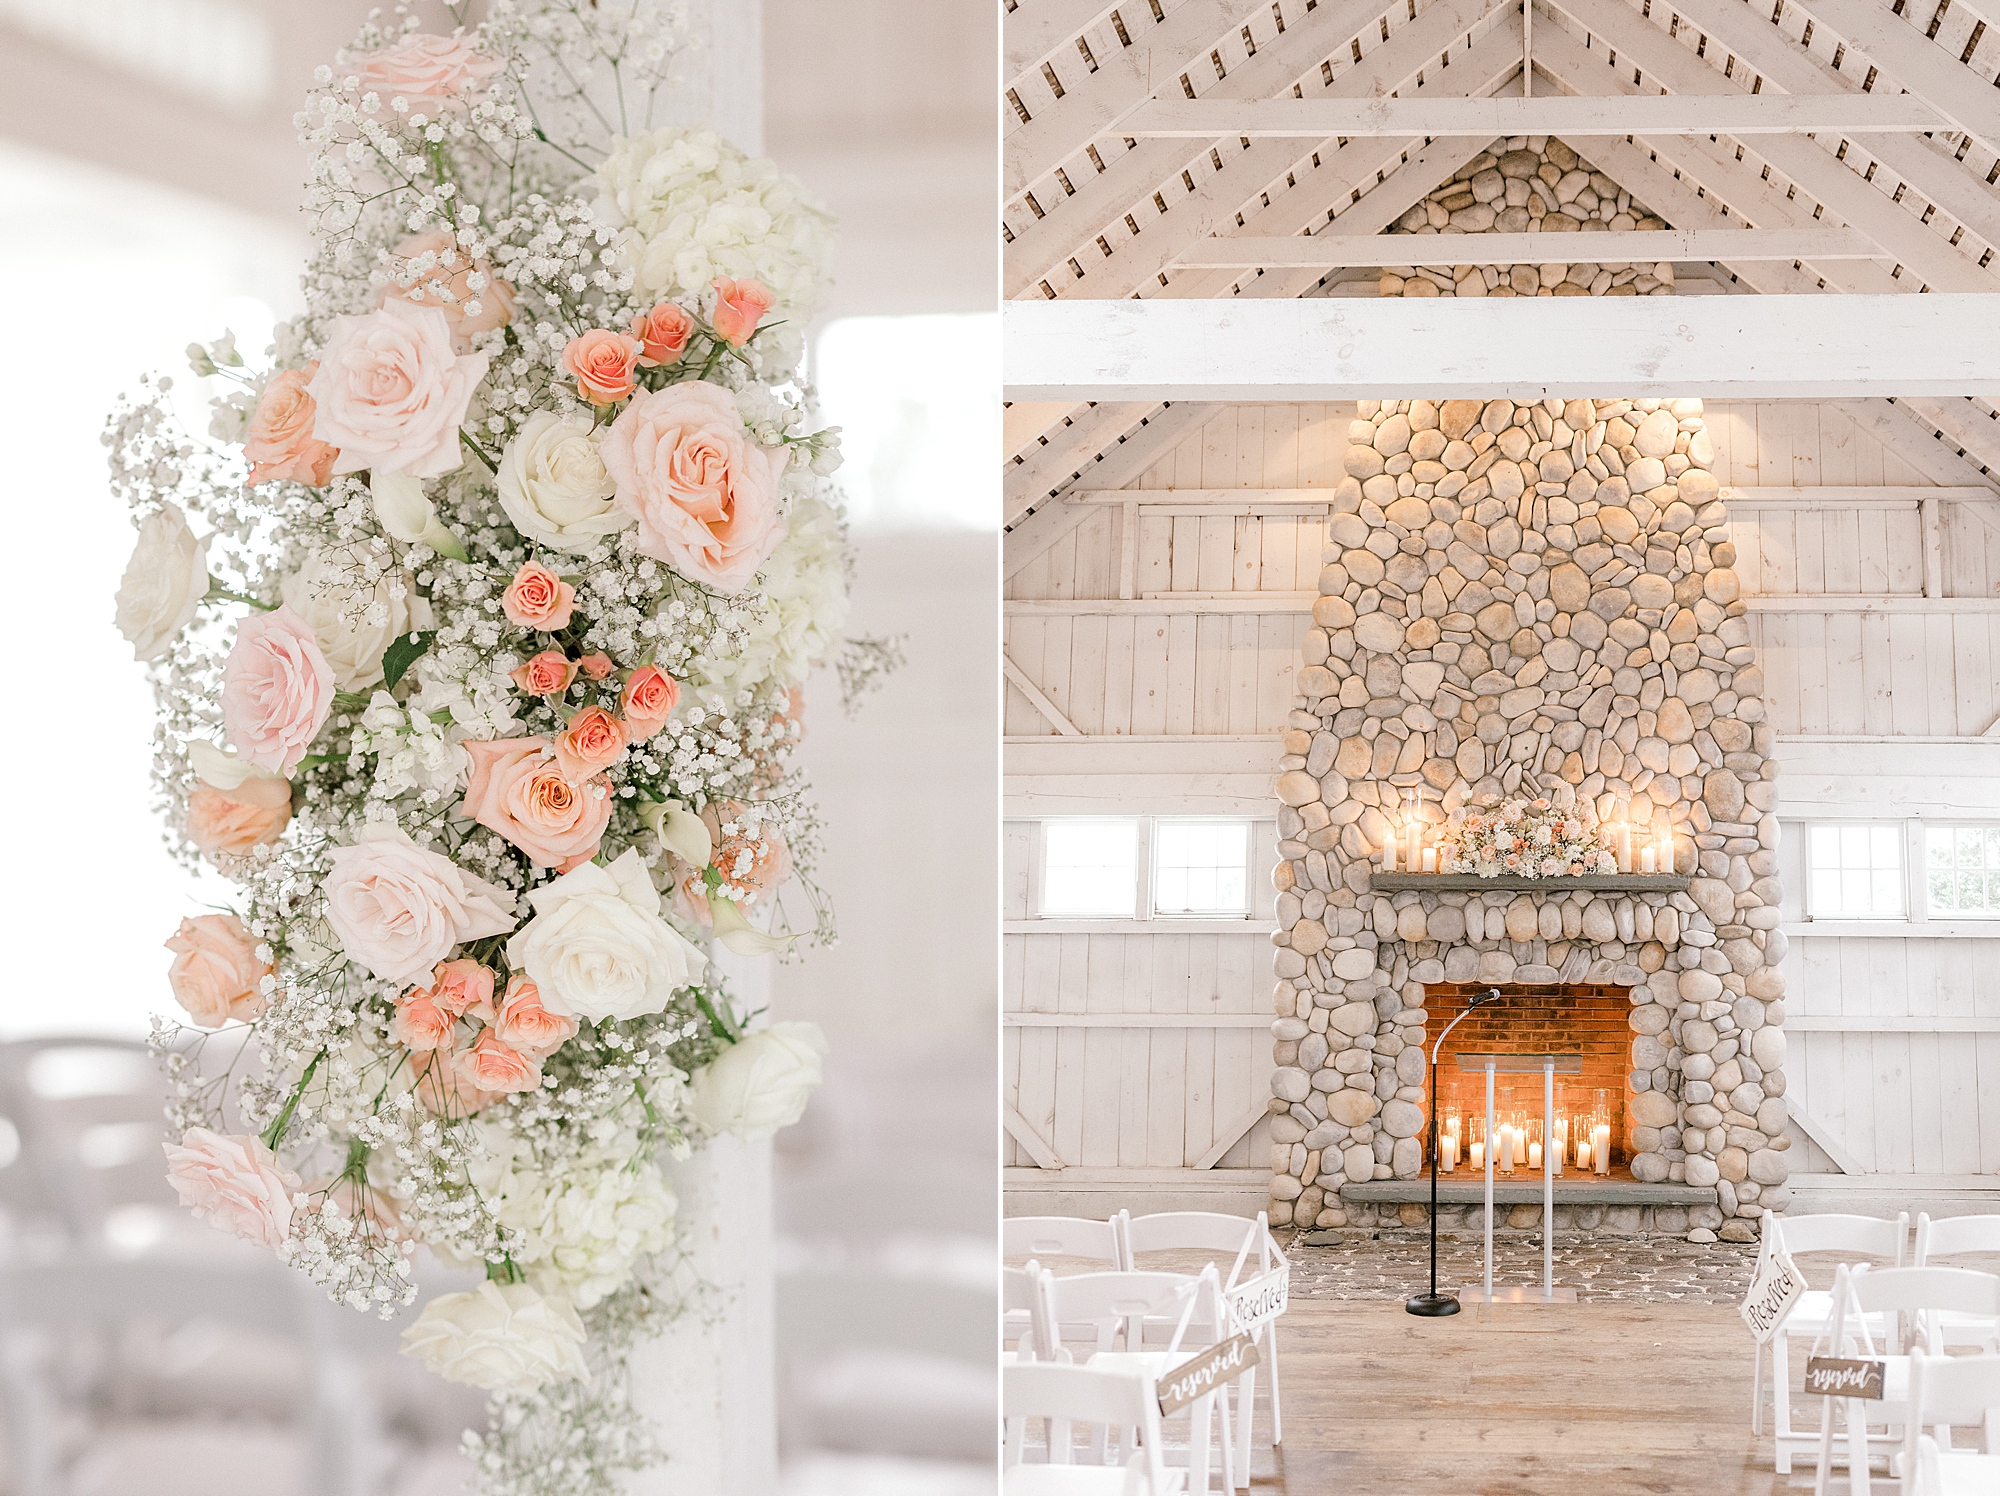 fireplace at Bonnet Island Estate with pink and white flowers with baby's breath on arbor